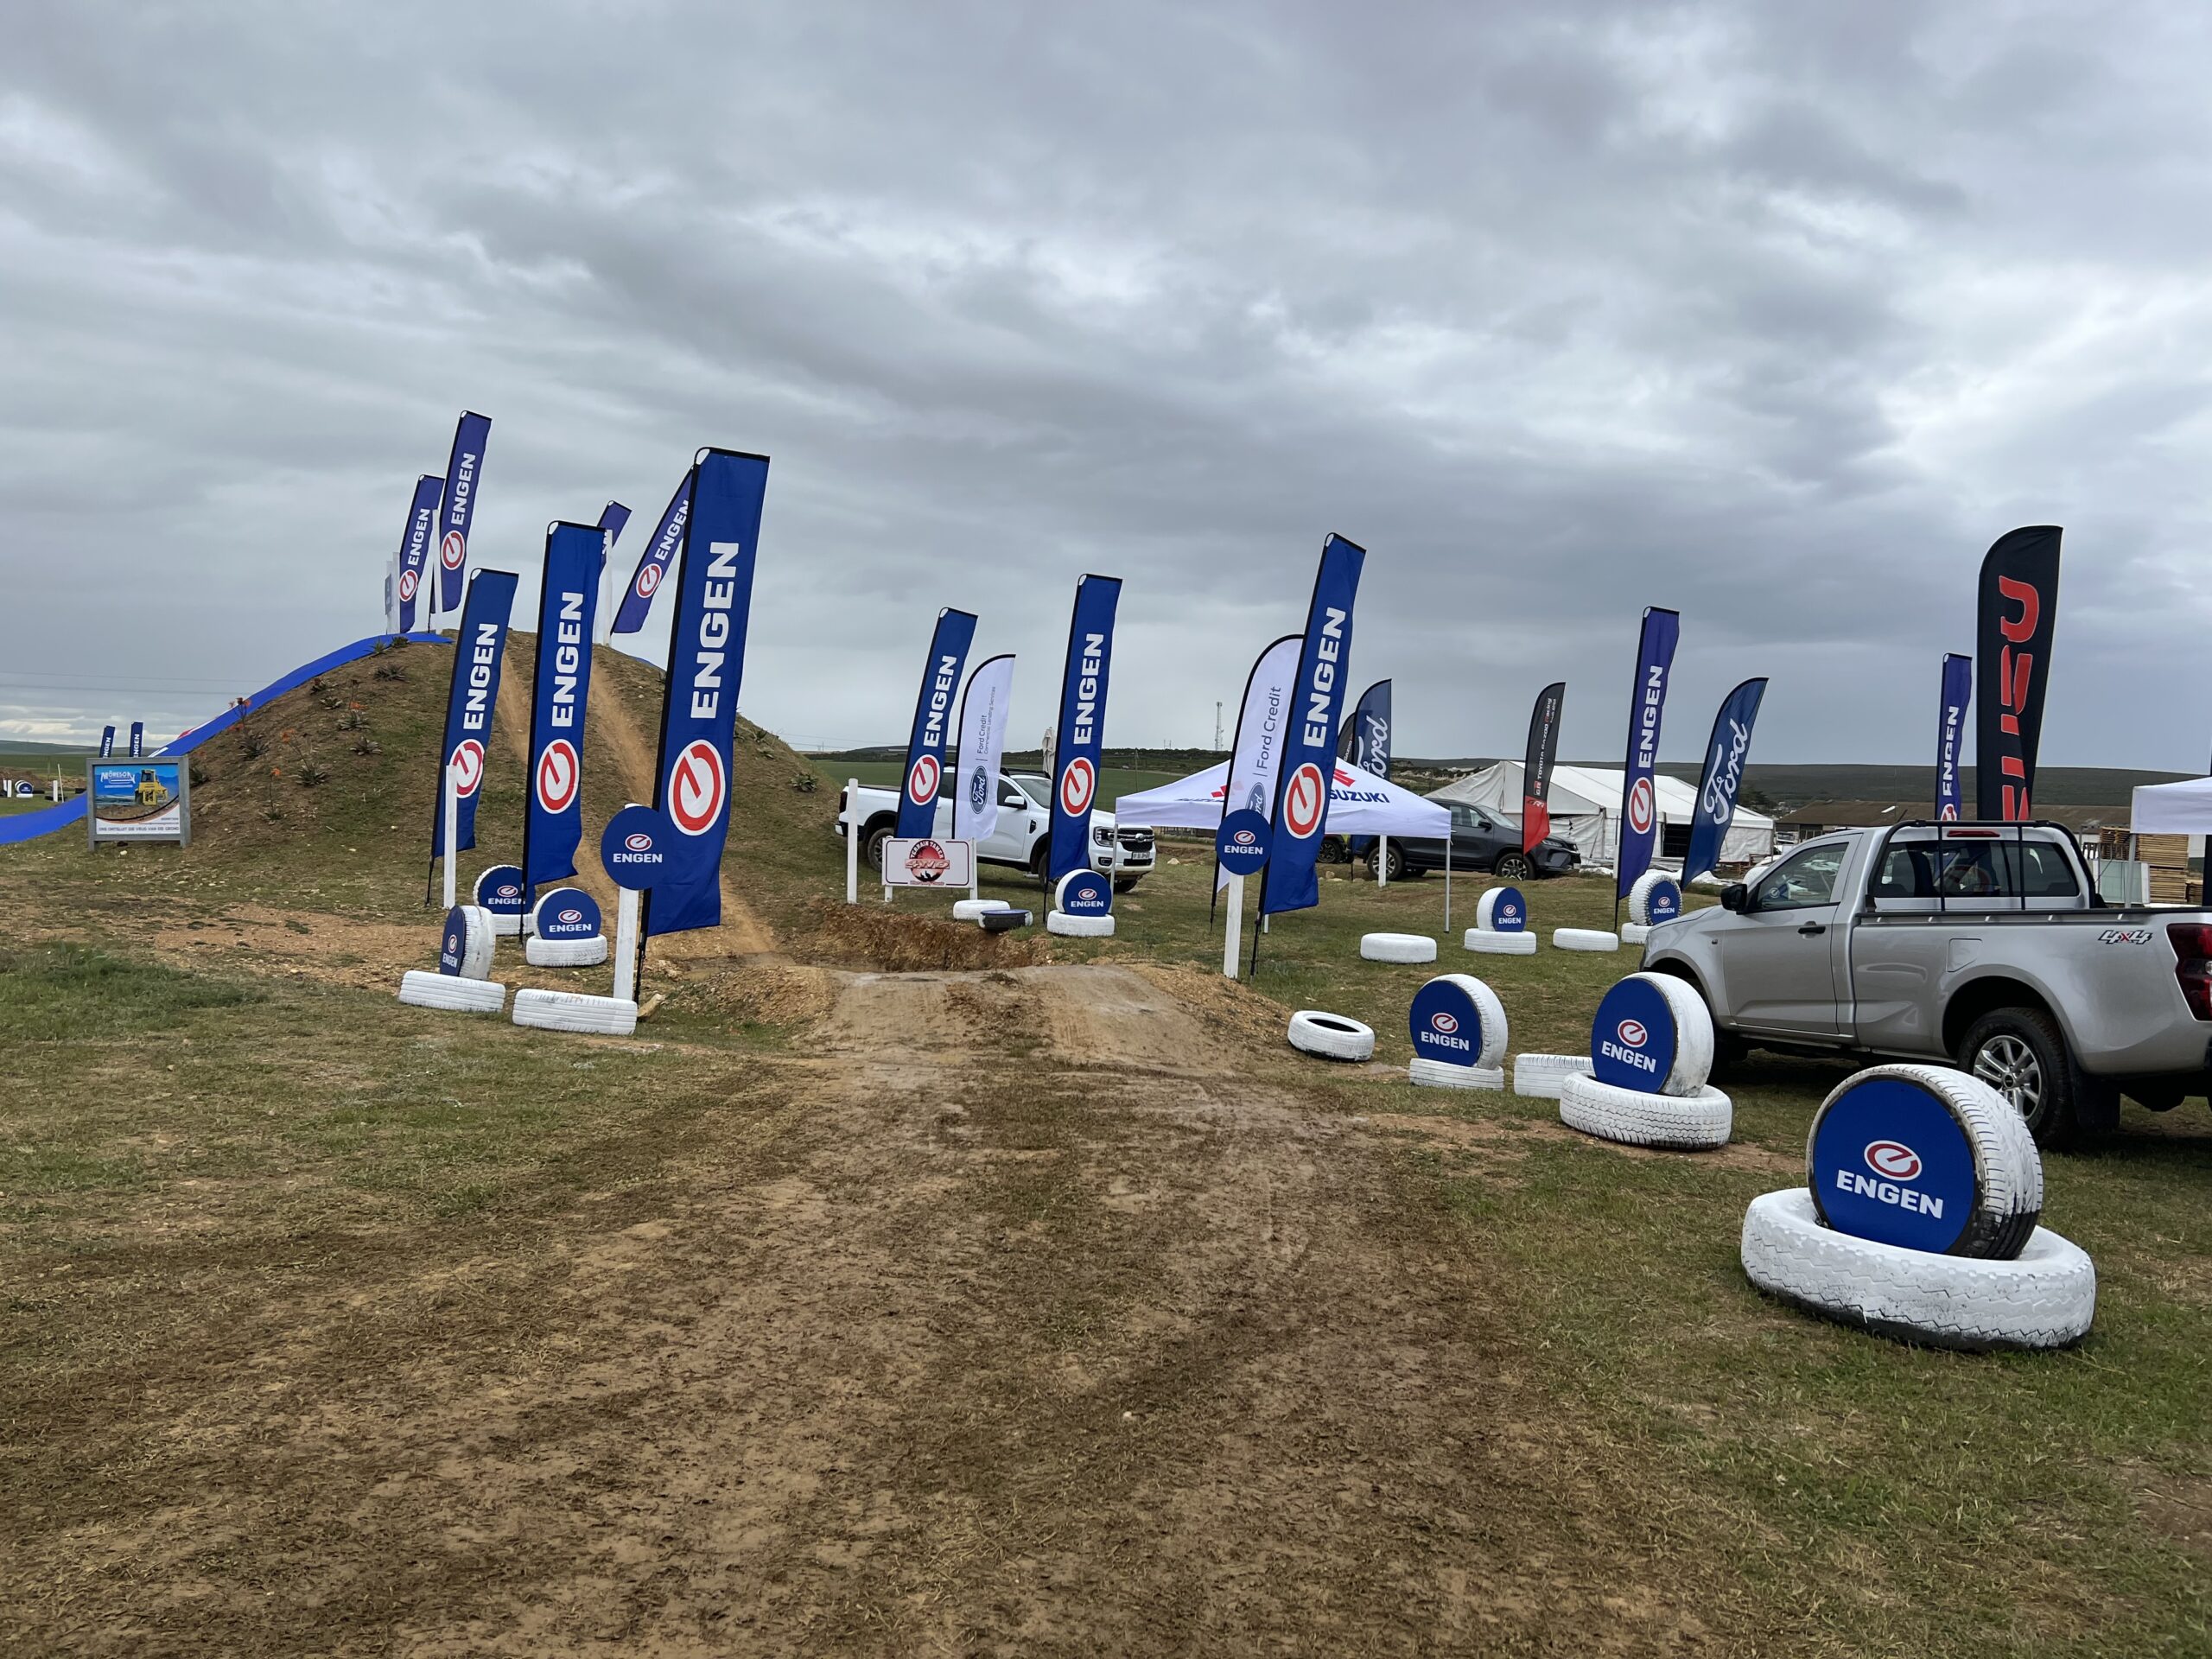 Engen Teams Up with Grain SA at Nampo to Drive Agriculture Forward